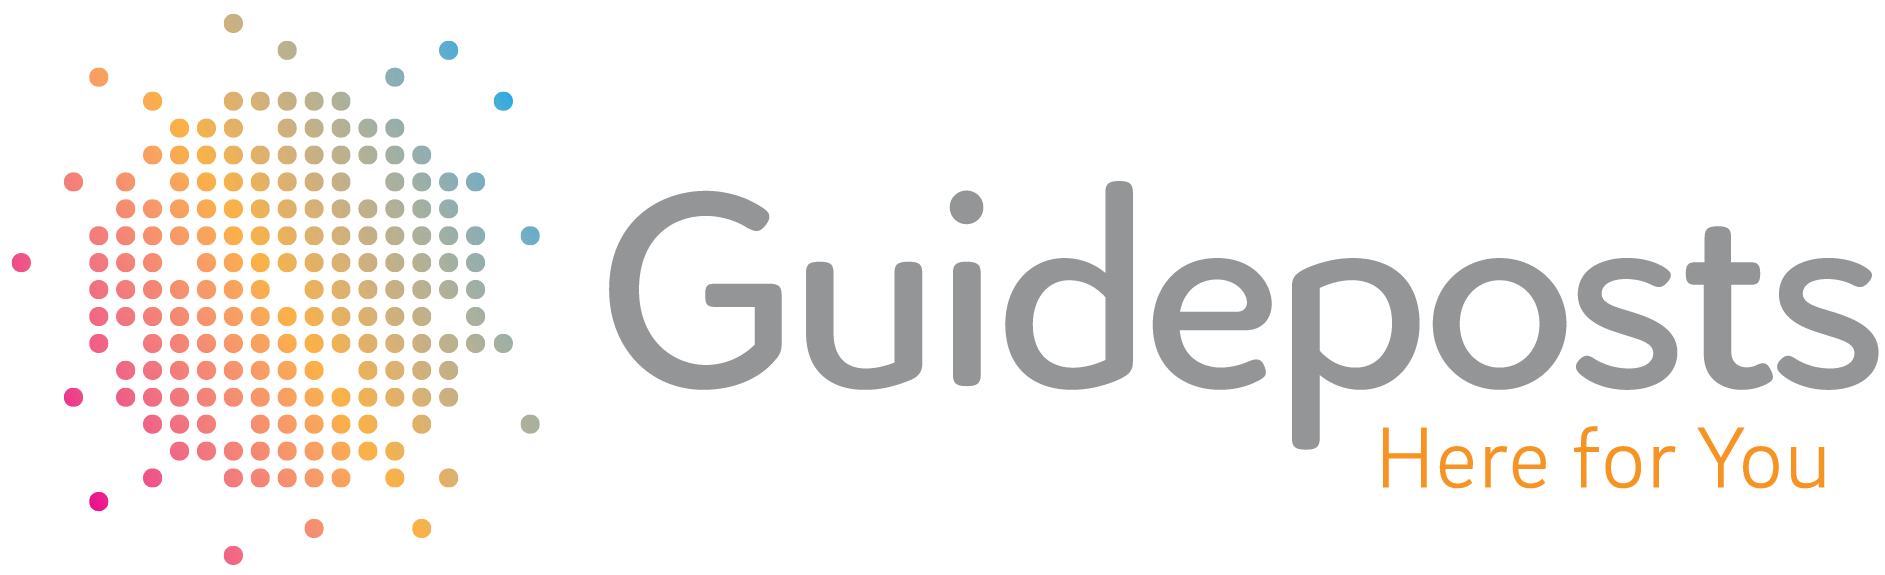 'Guideposts - Here for you' logo